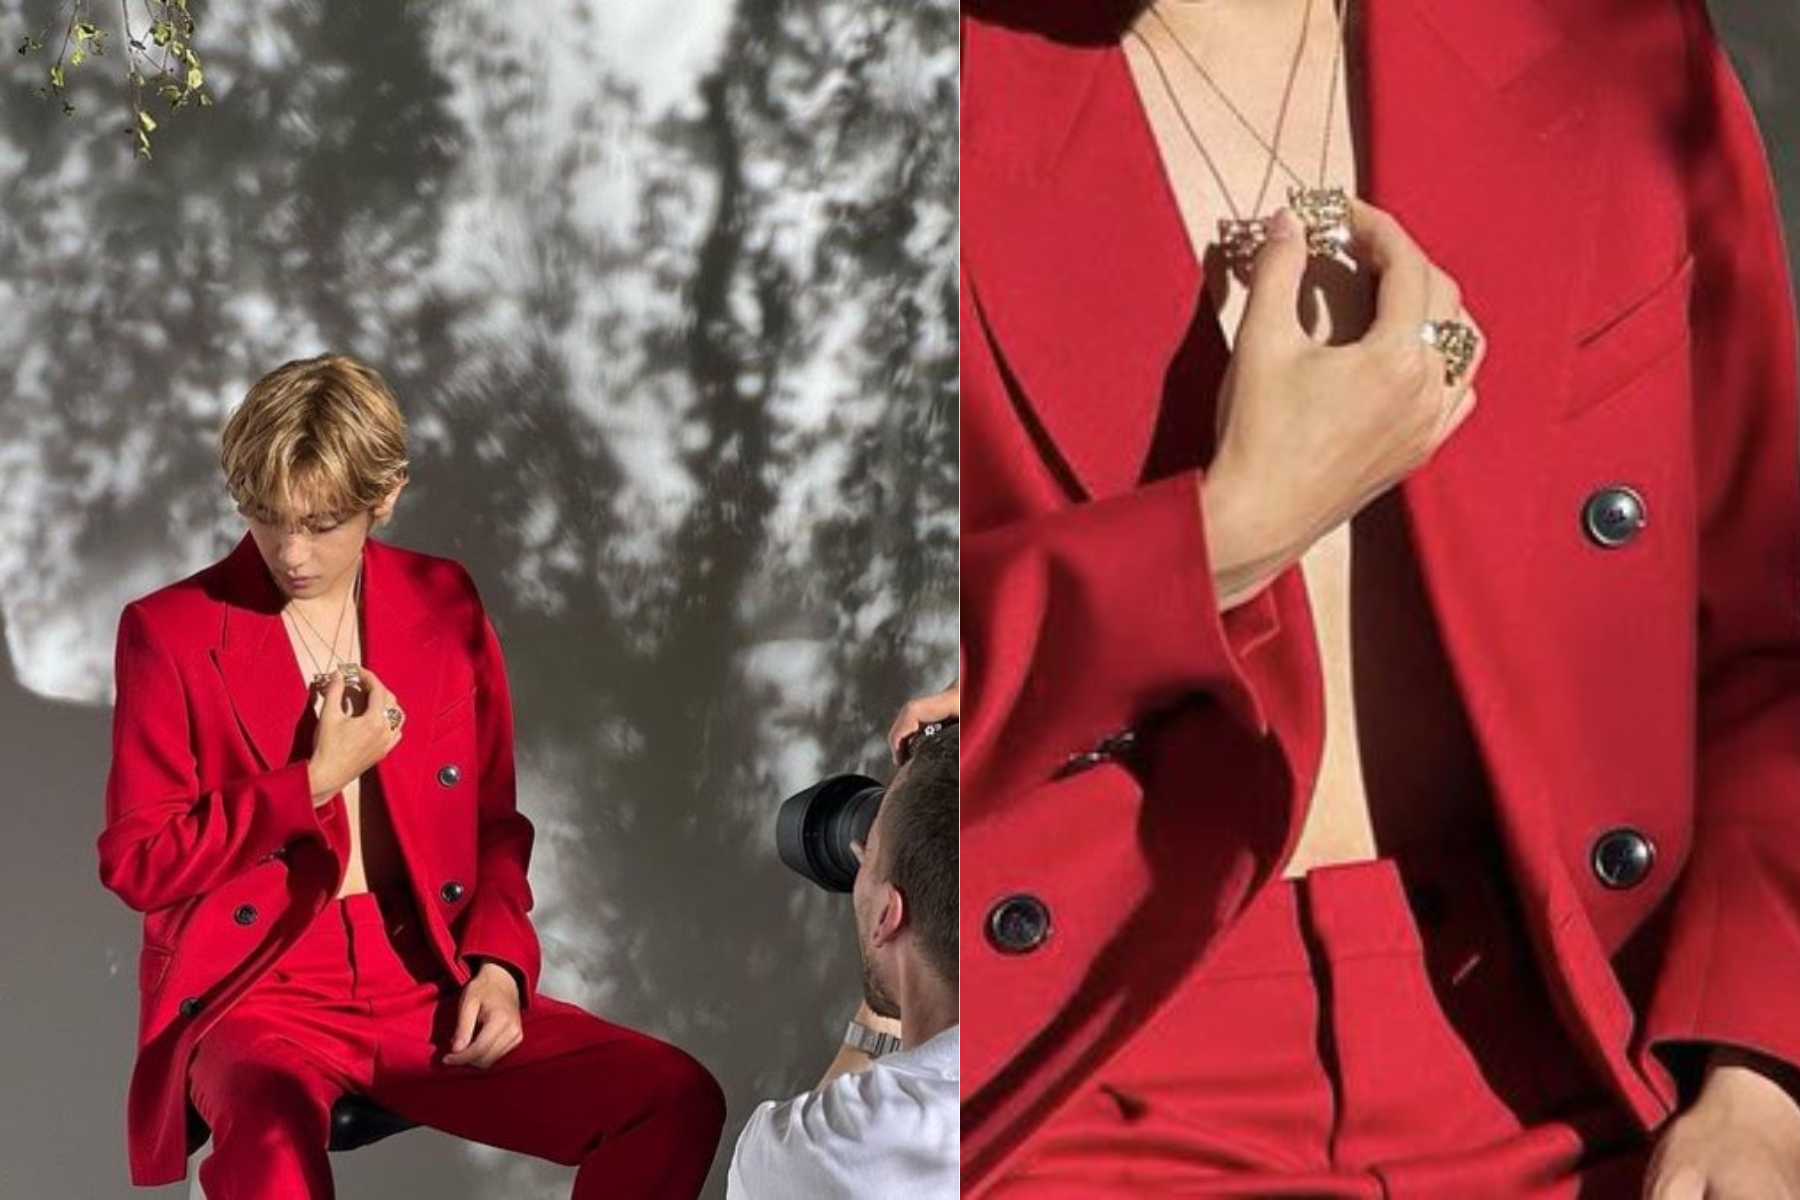 V's photoshoot with Cartier necklace